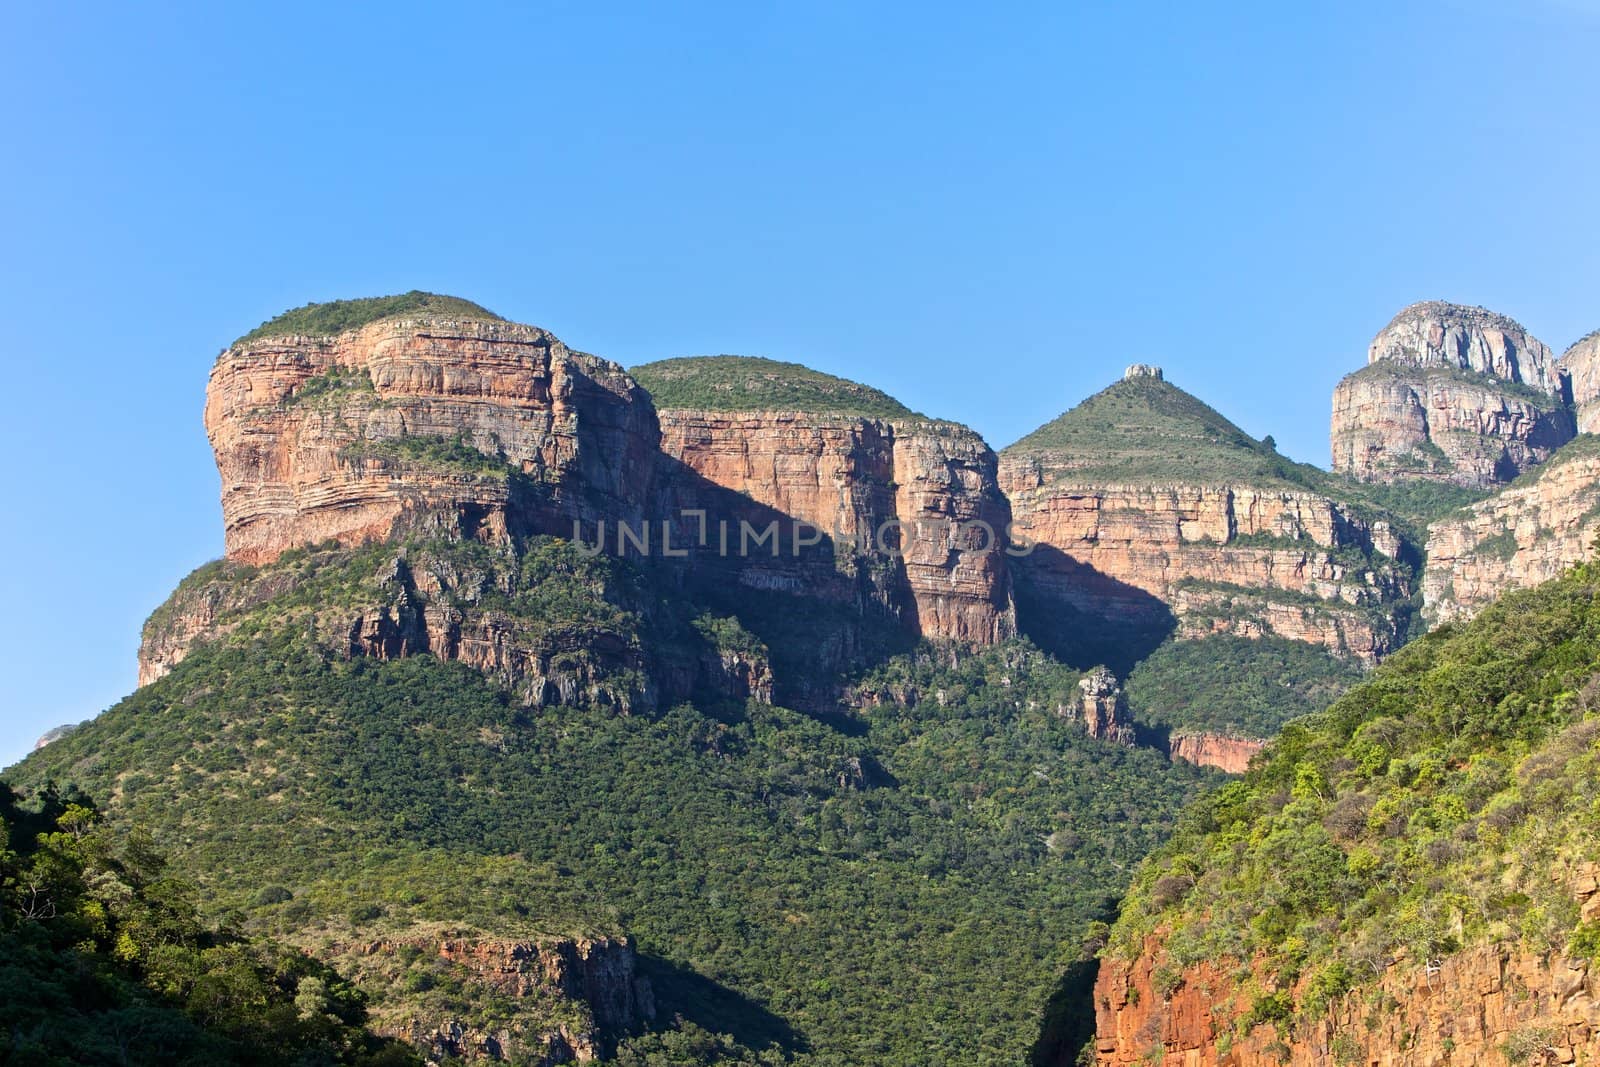 Blyde River Canyon and the three rondovels in Mpummalanga, South Africa